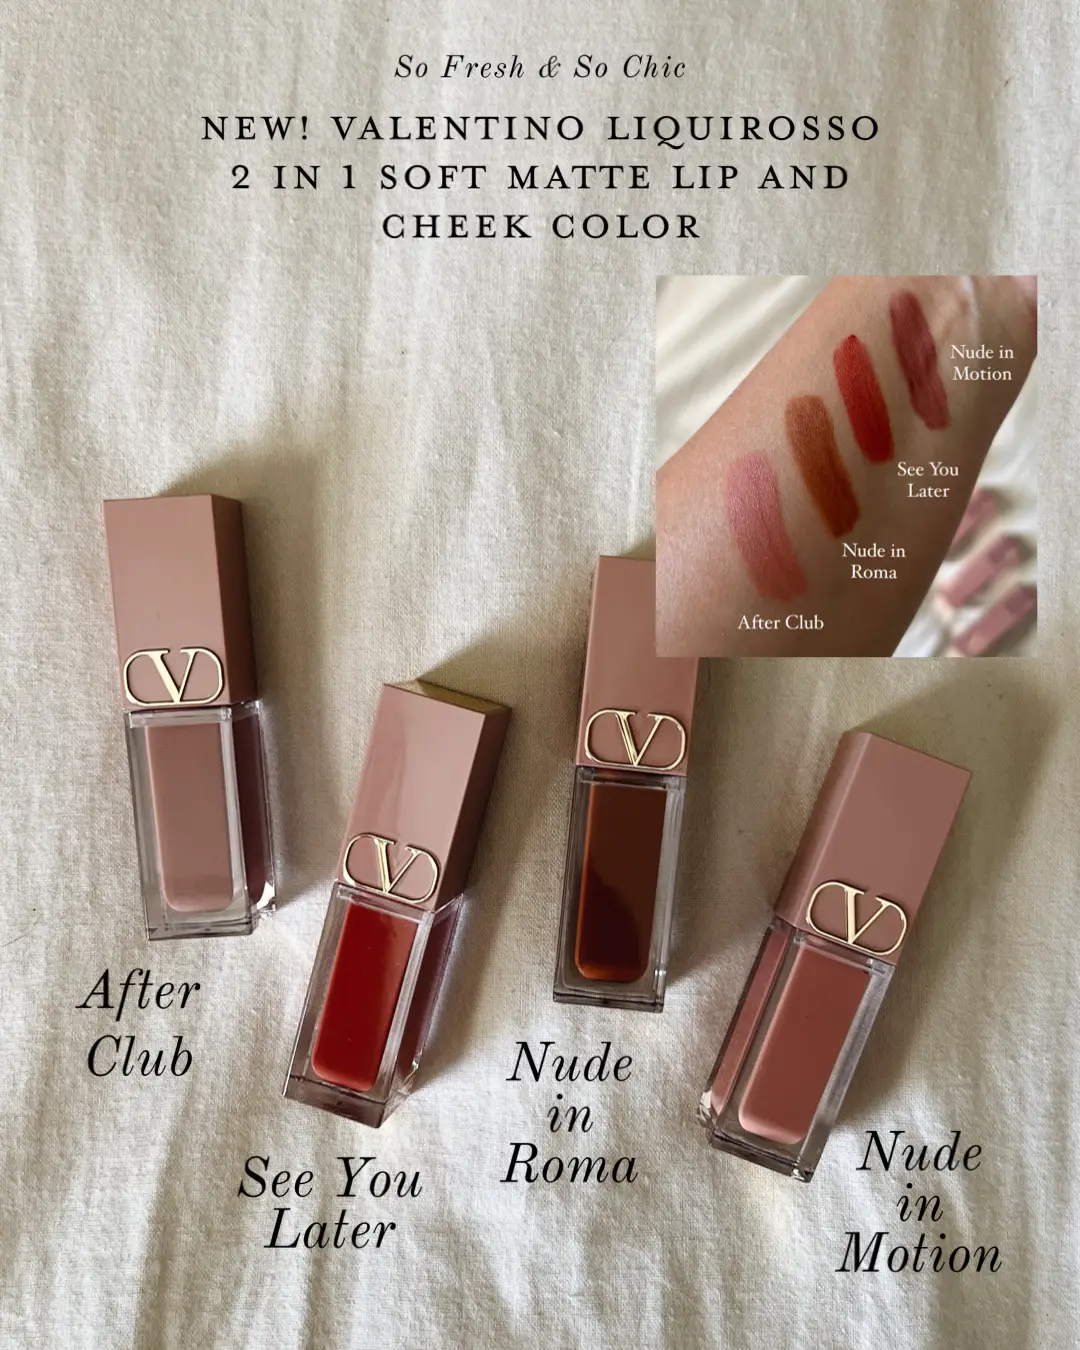 ankomme måske relæ New Valentino lip & cheek colours! Obsessed. 🥰💋 | Gallery posted by  sofreshsochic | Lemon8